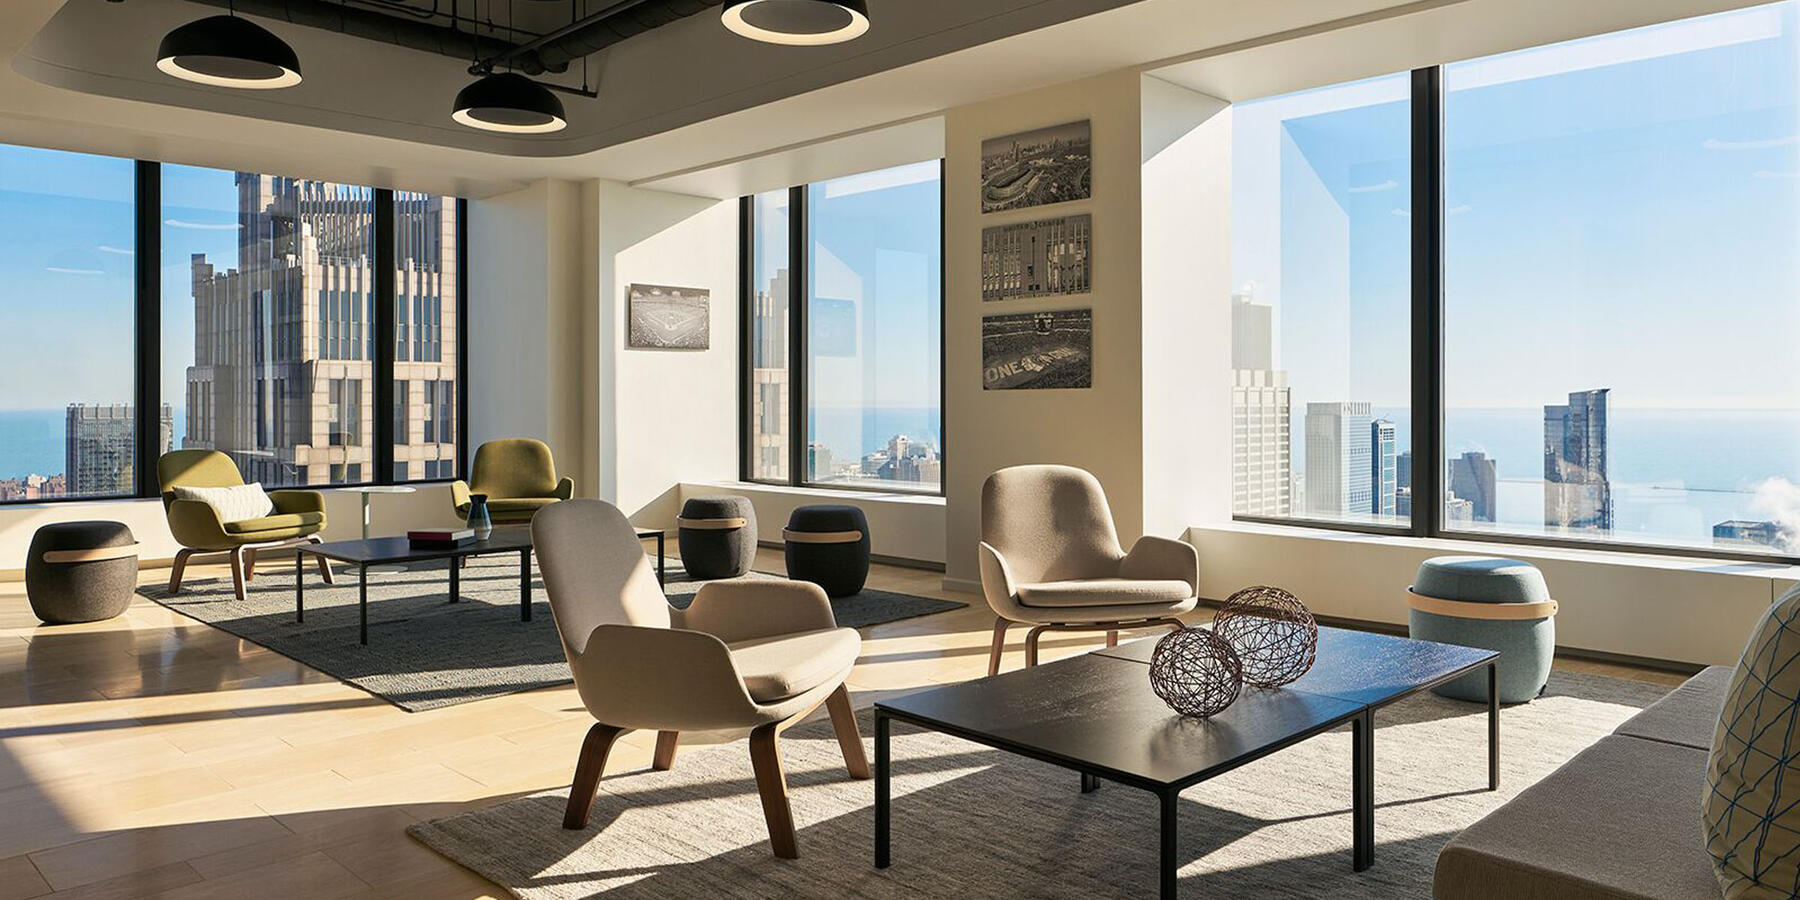 Chicago Office Construction - Tressler Willis Tower interior lounge space